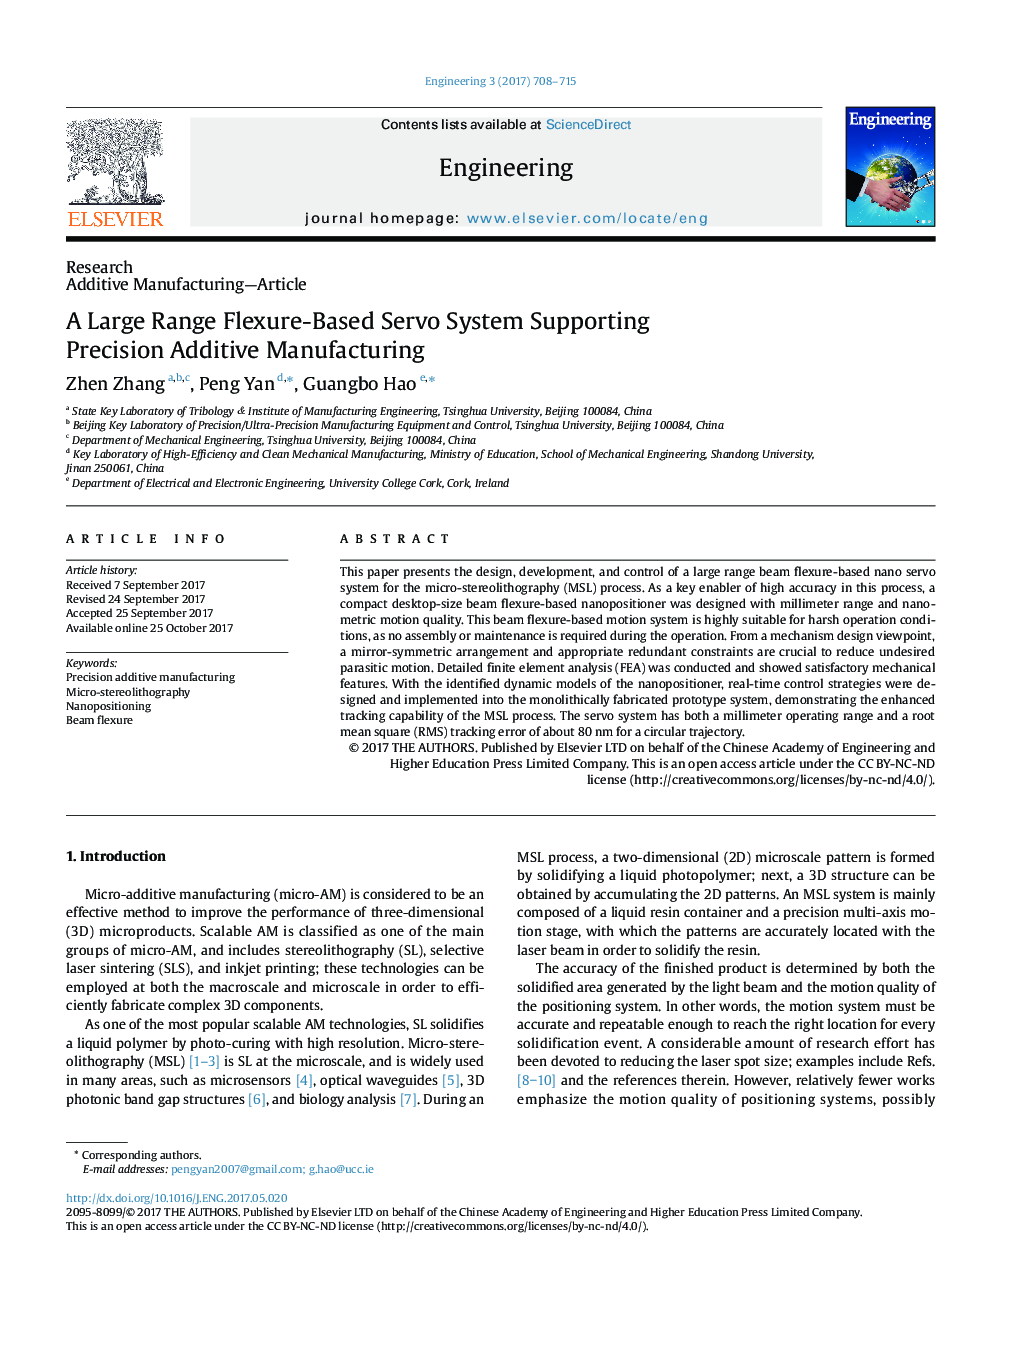 A Large Range Flexure-Based Servo System Supporting Precision Additive Manufacturing